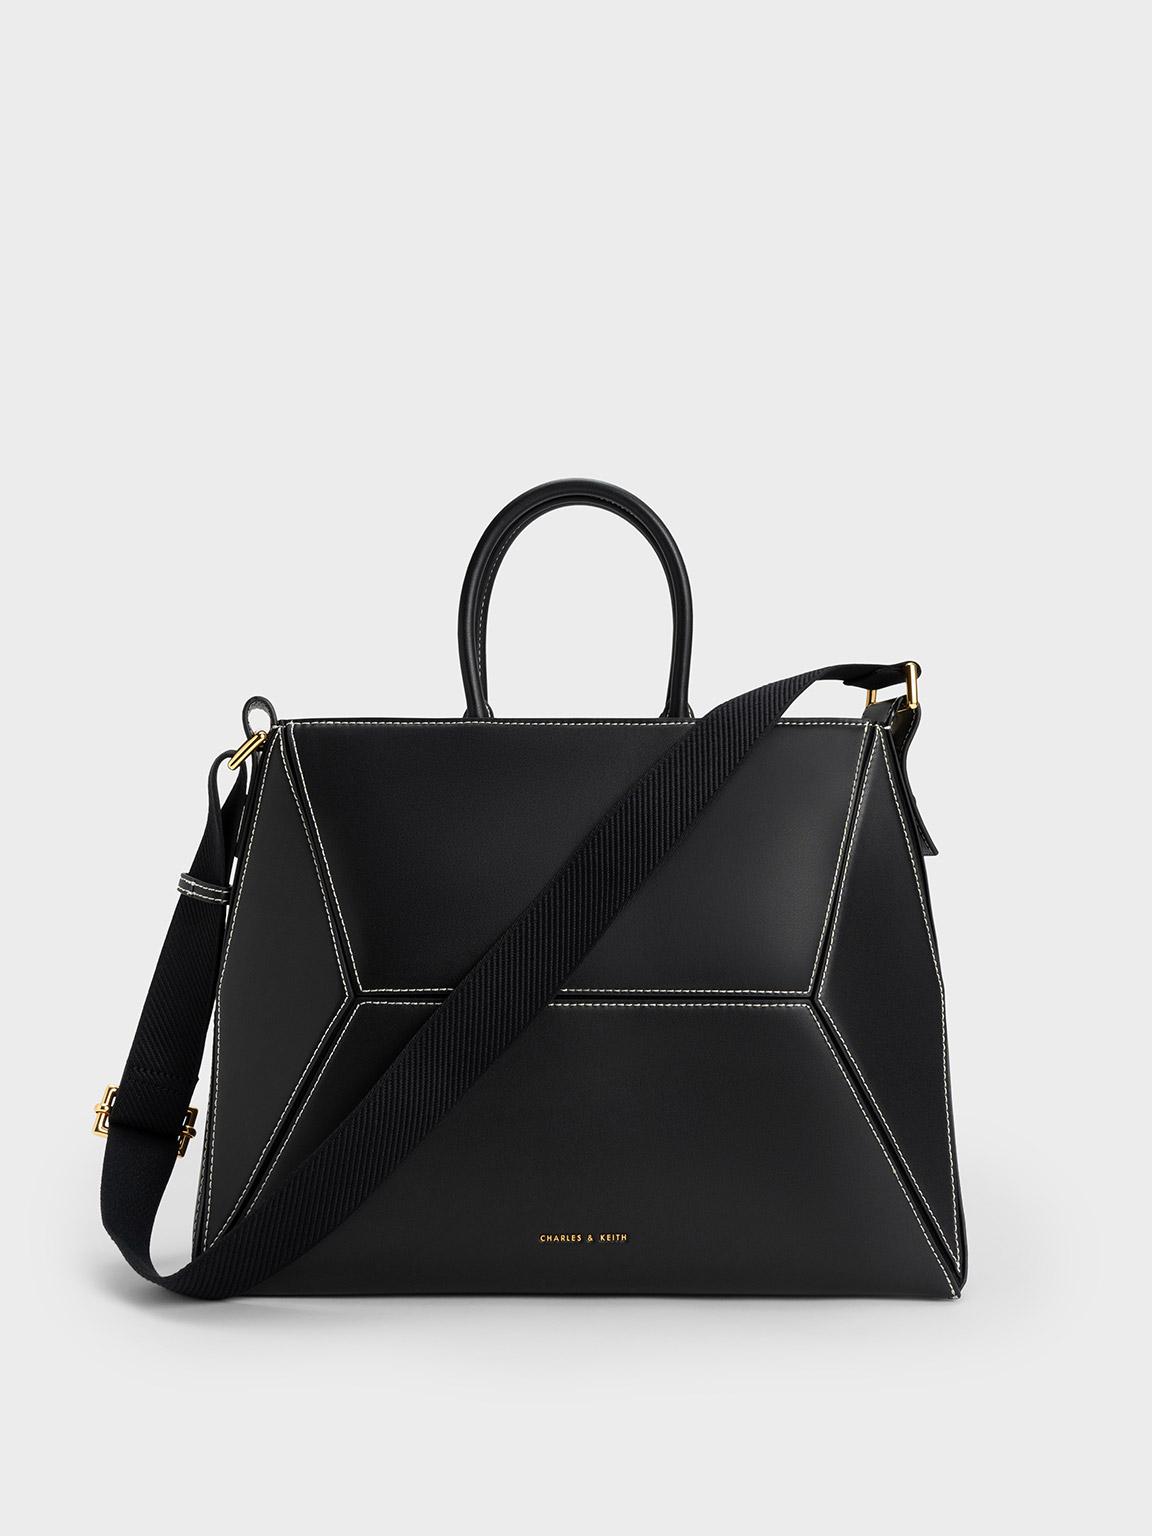 Popular Bags That Make The Brand CHARLES & KEITH - Maison Retail Management  International